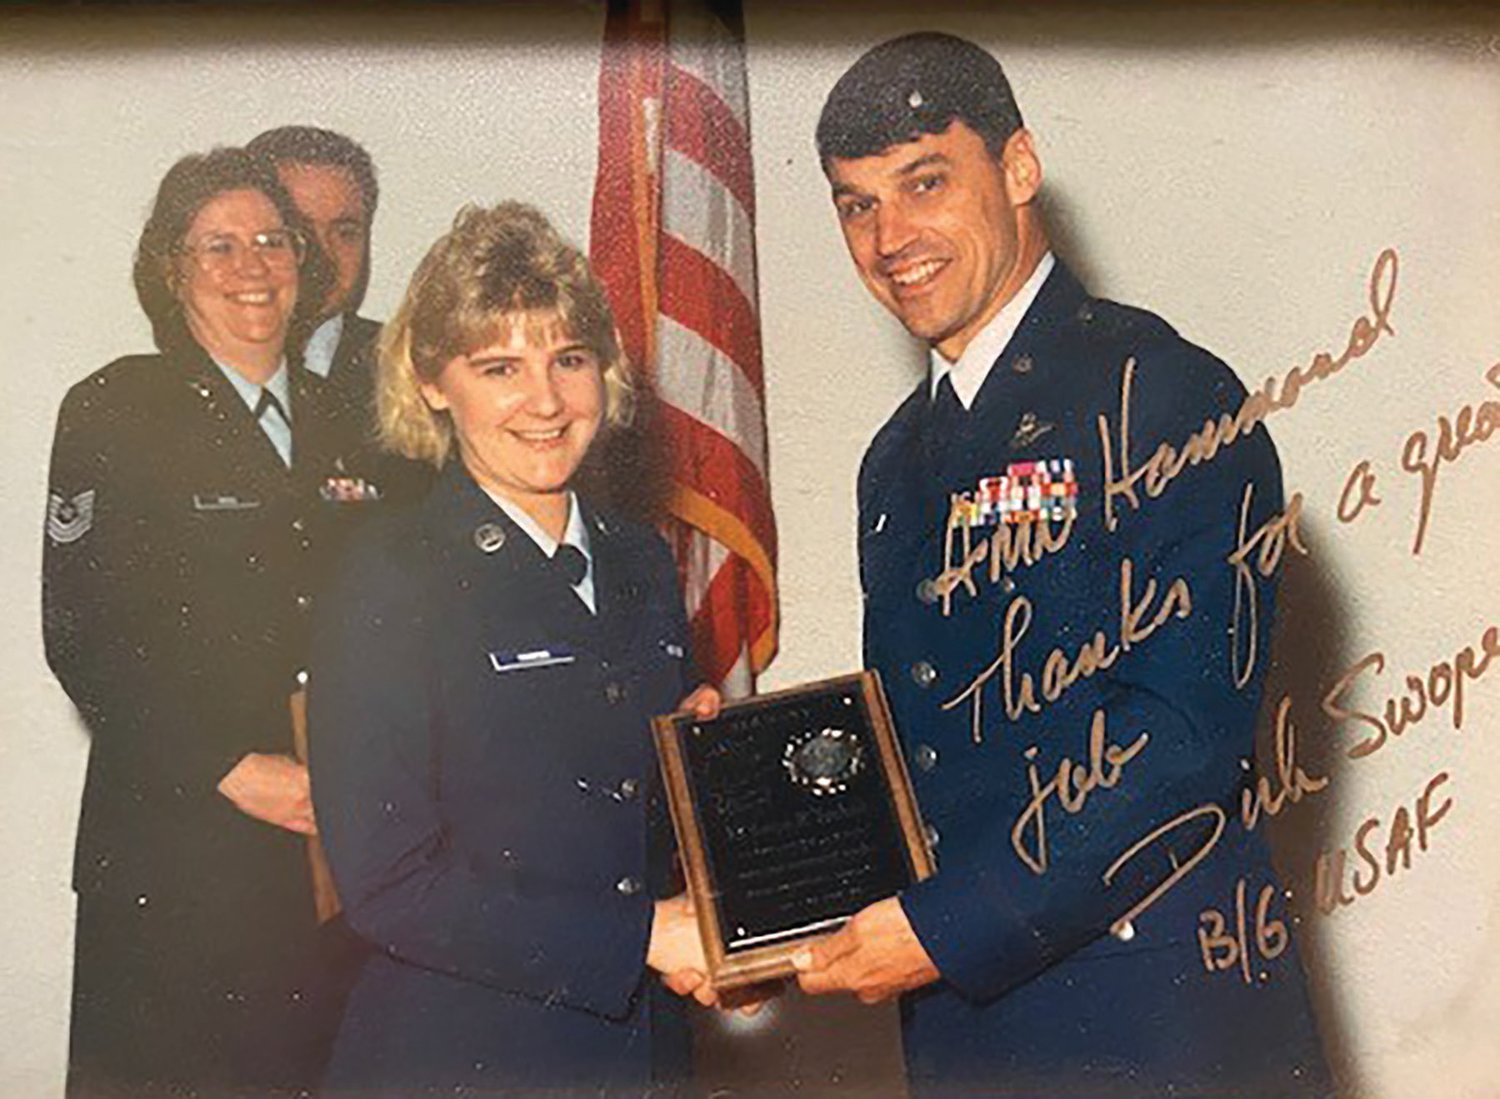 Catrina Hammond-Meijer Receives Airman of the Quarter award at 652nd USAF Contingency Hospital Donaueschingen, Germany in 1991.